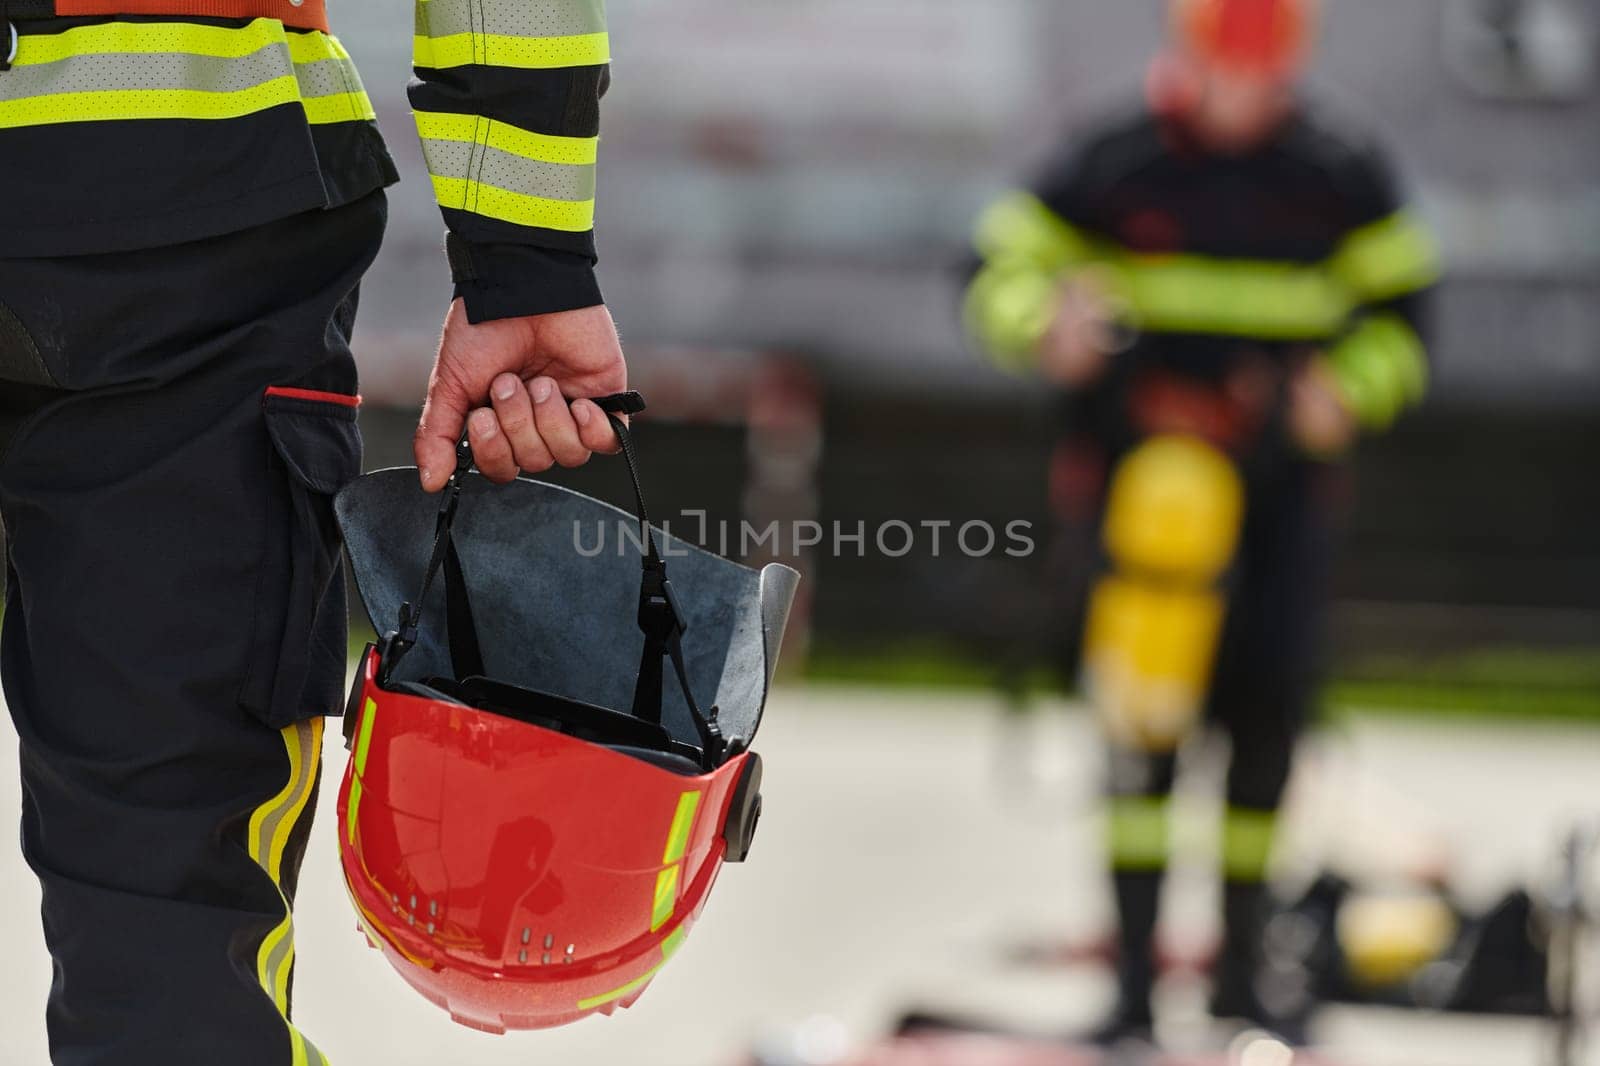 A close up shot capturing the hand of a firefighter holding a fire helmet with a strong sense of readiness and determination.